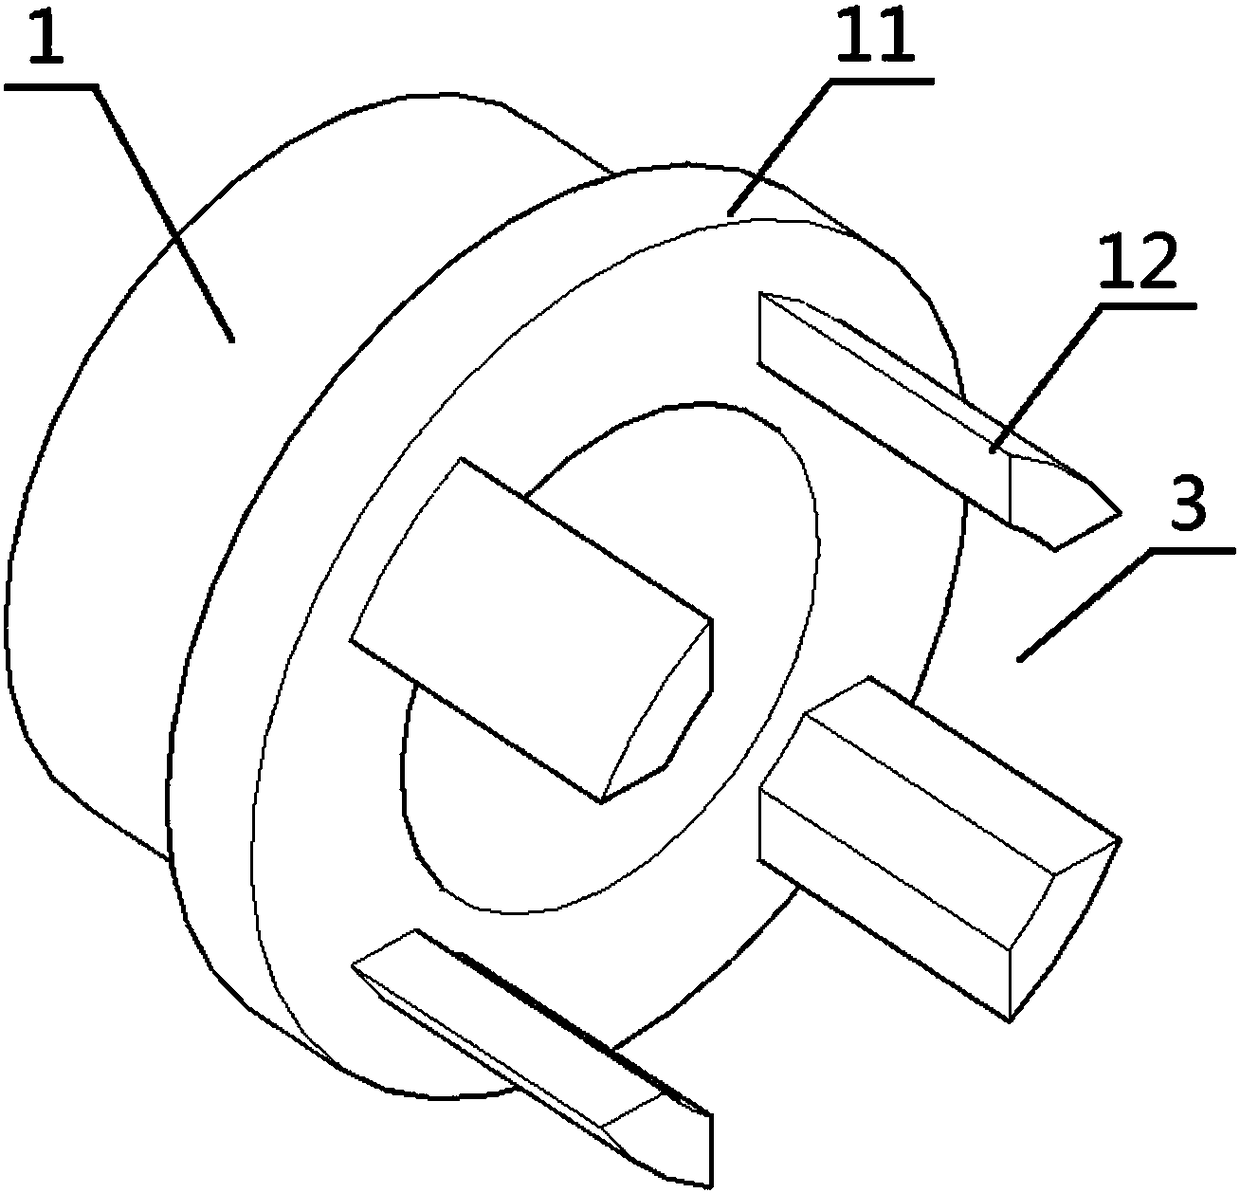 Spline claw and chaining claw diversion assembly inside valve body